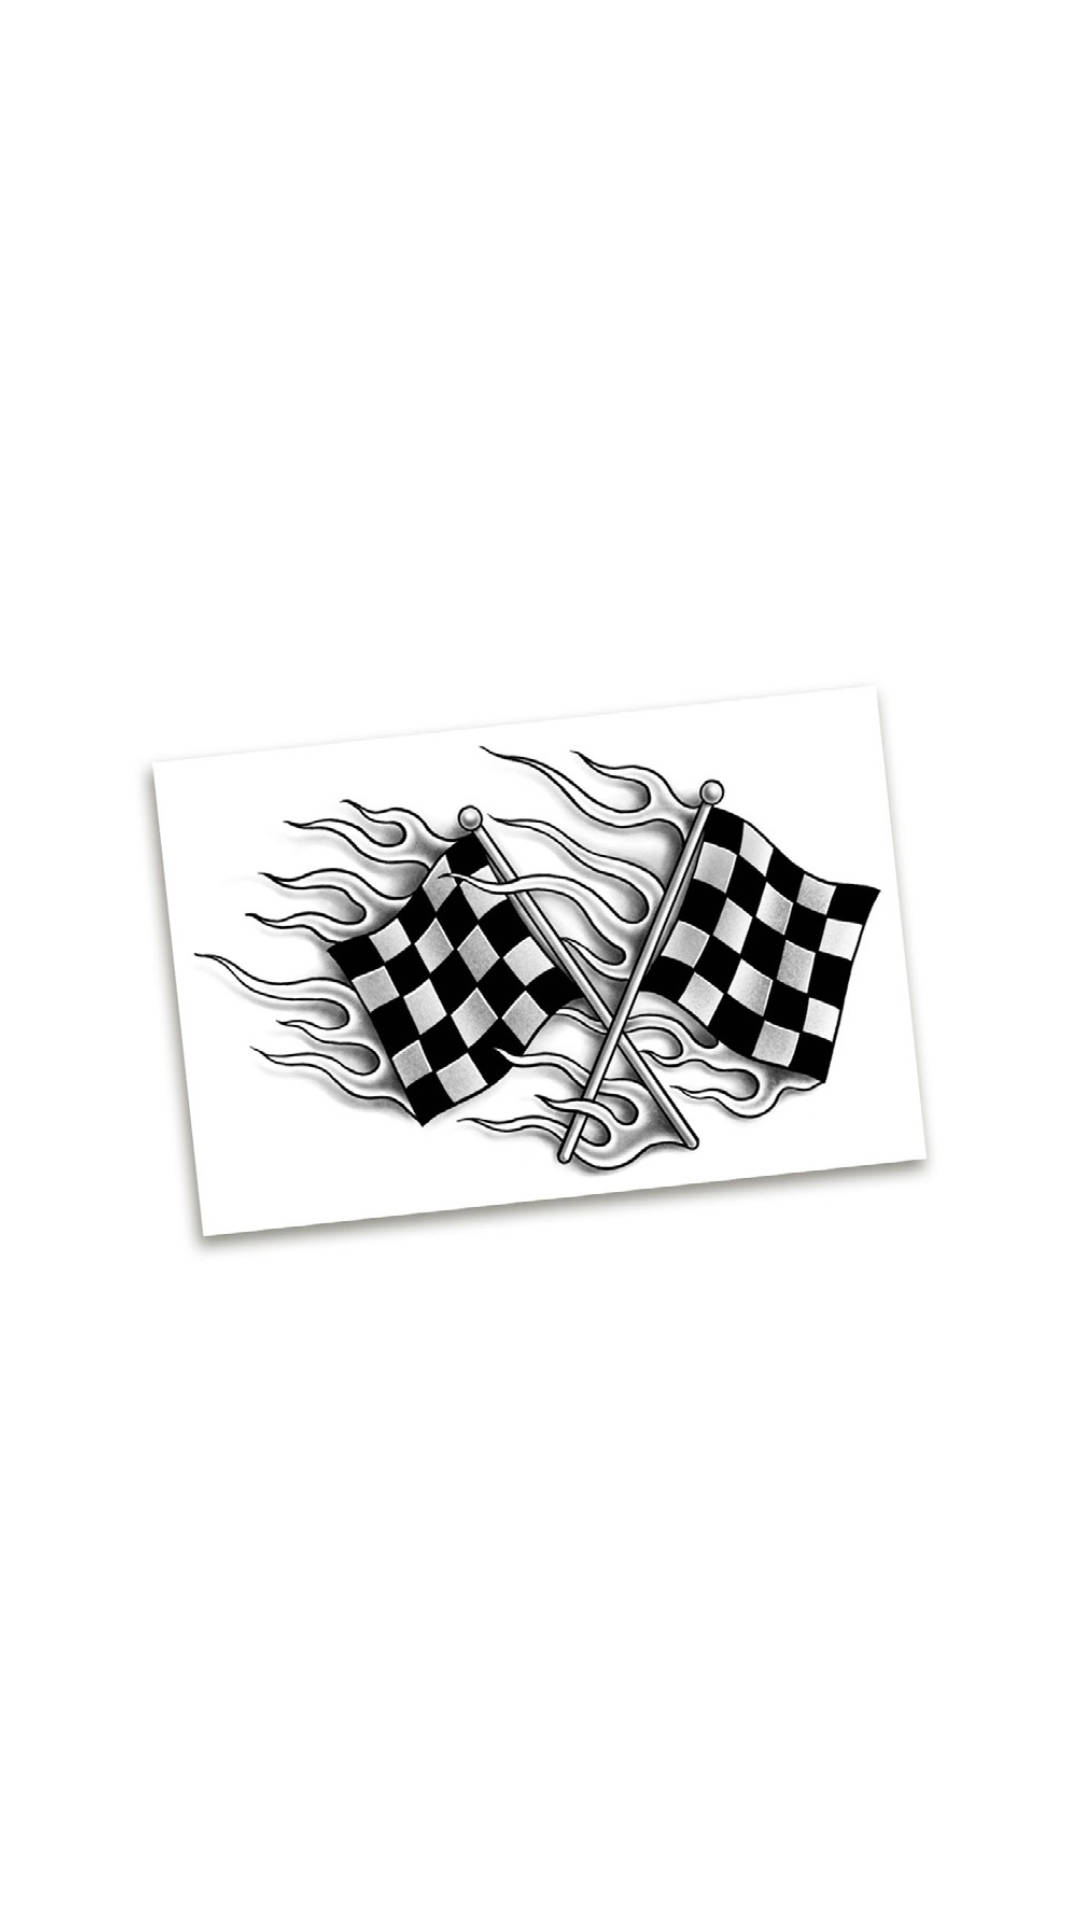 Burning Crossed Checkered Flags Wallpaper